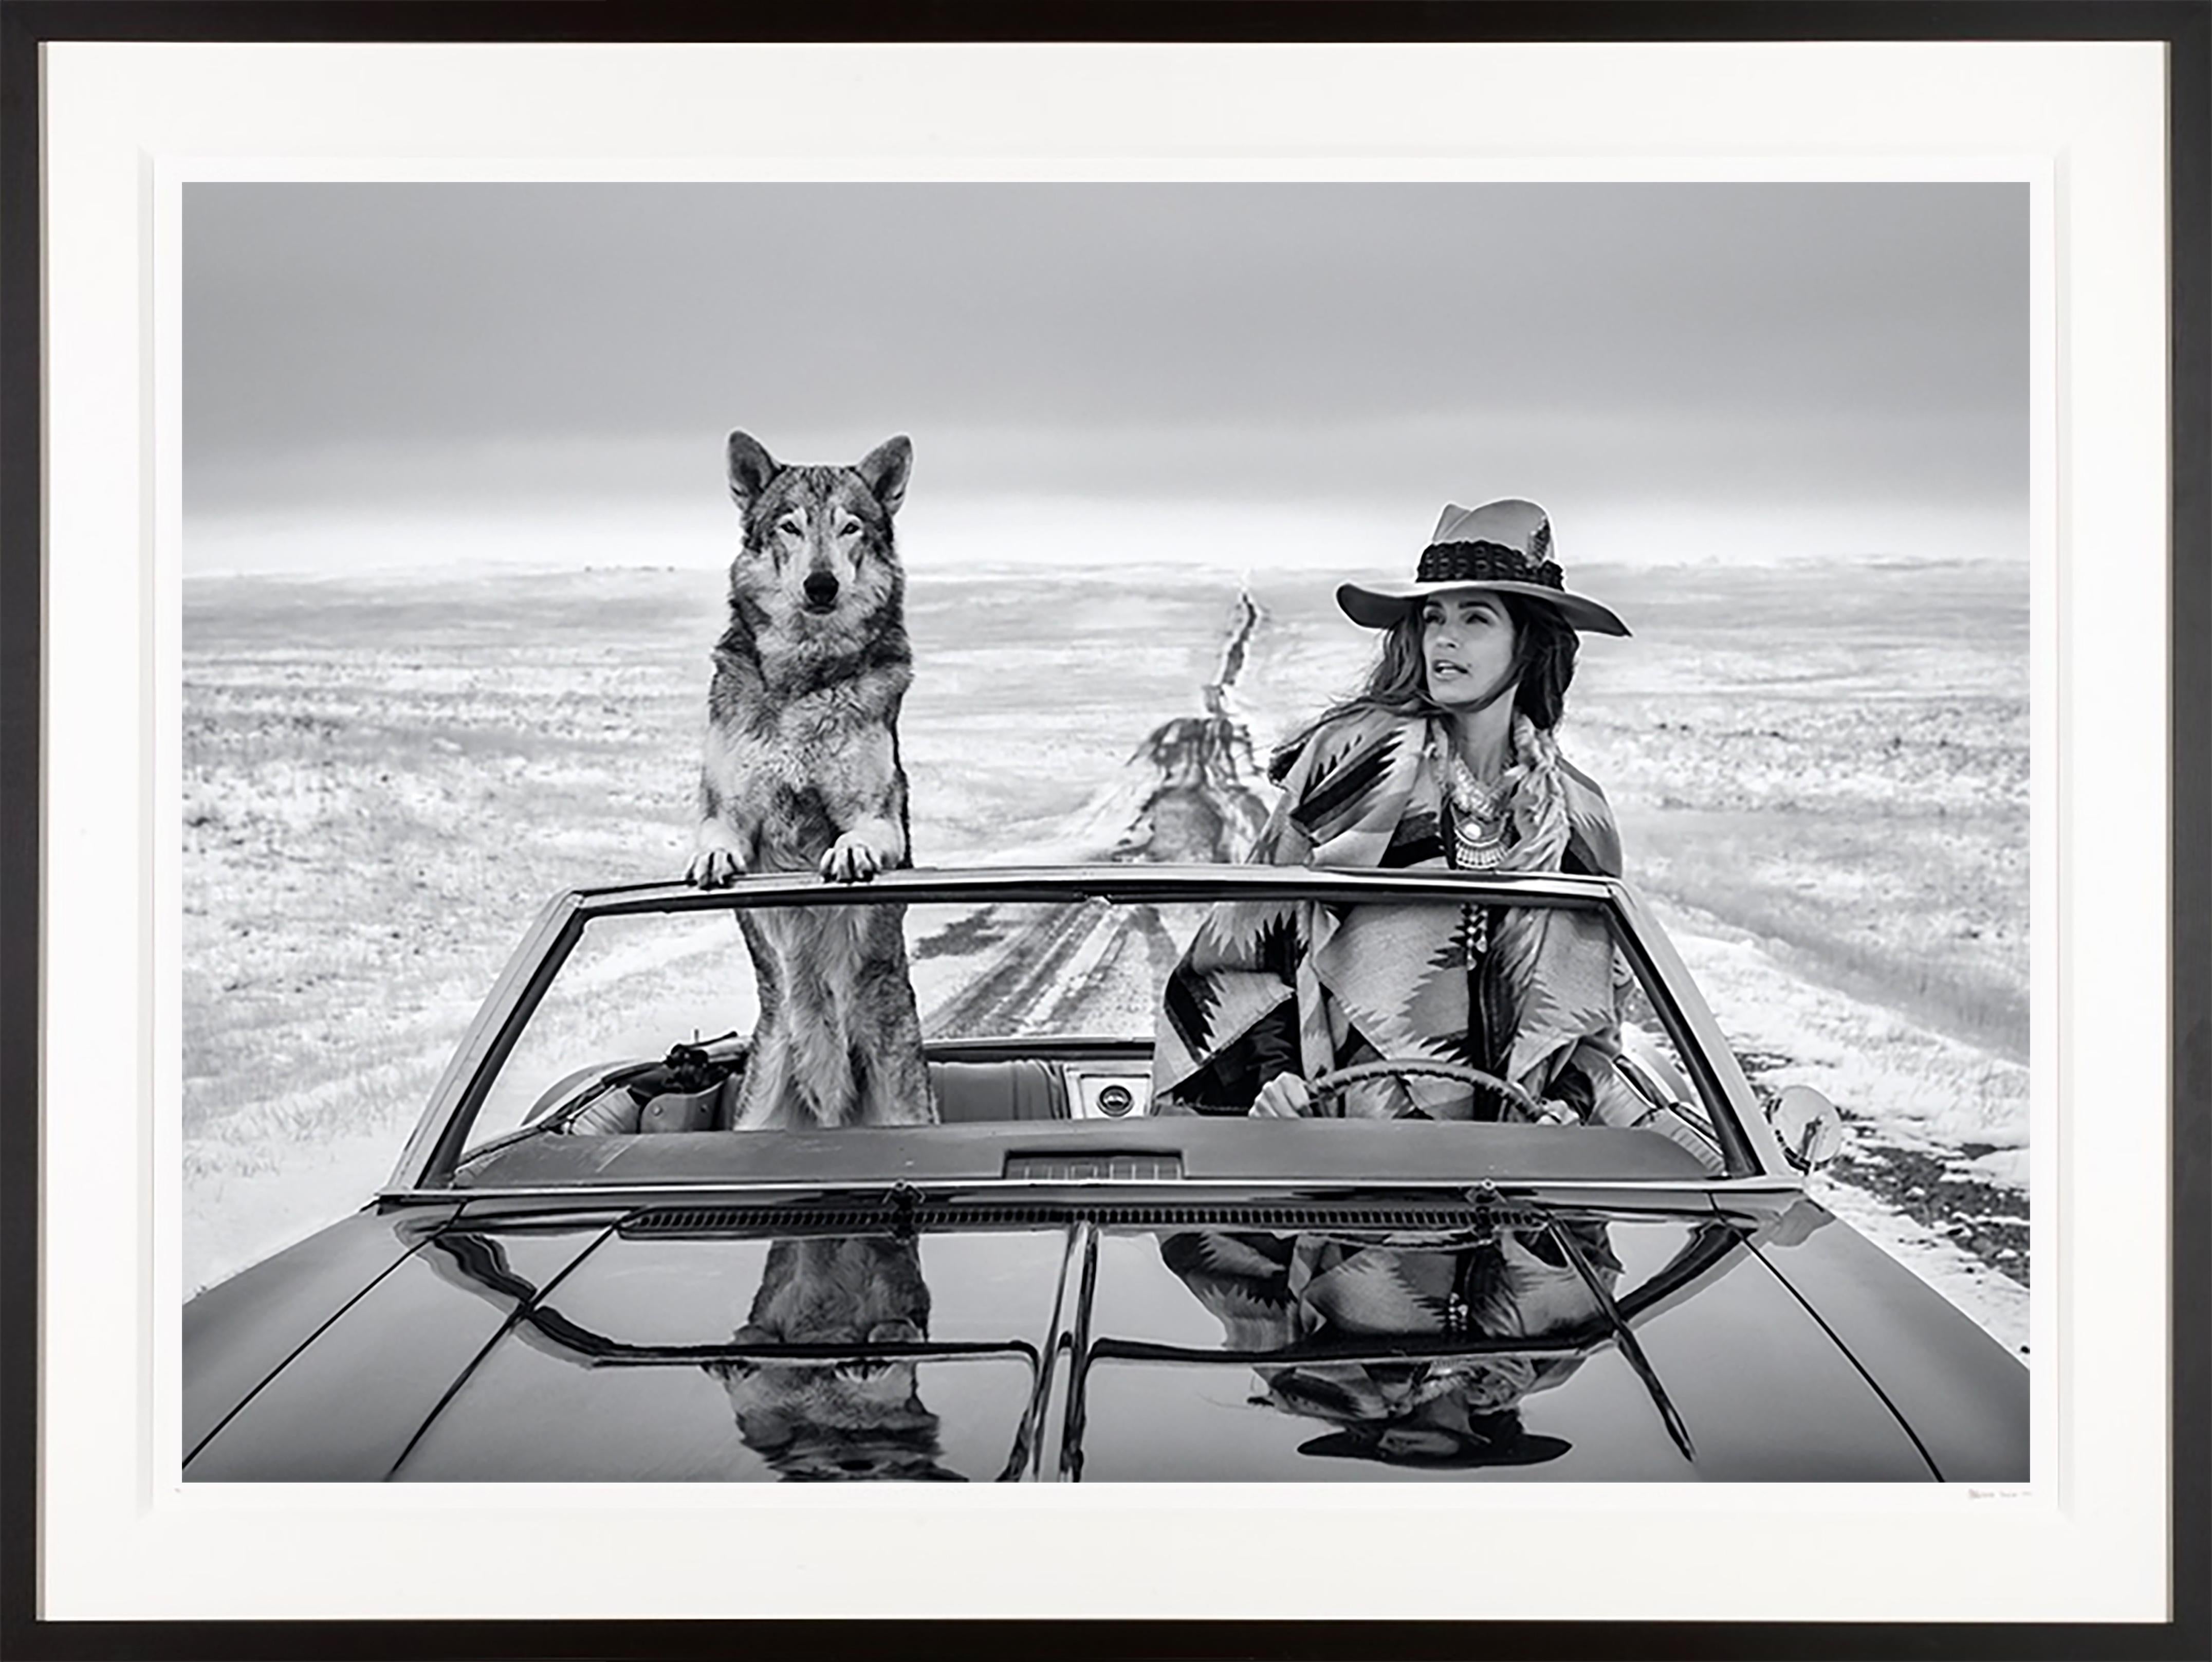 David Yarrow Nude Photograph - "On The Road Again" Sexy Badass Cindy Crawford in a Vintage Car with a Wolf